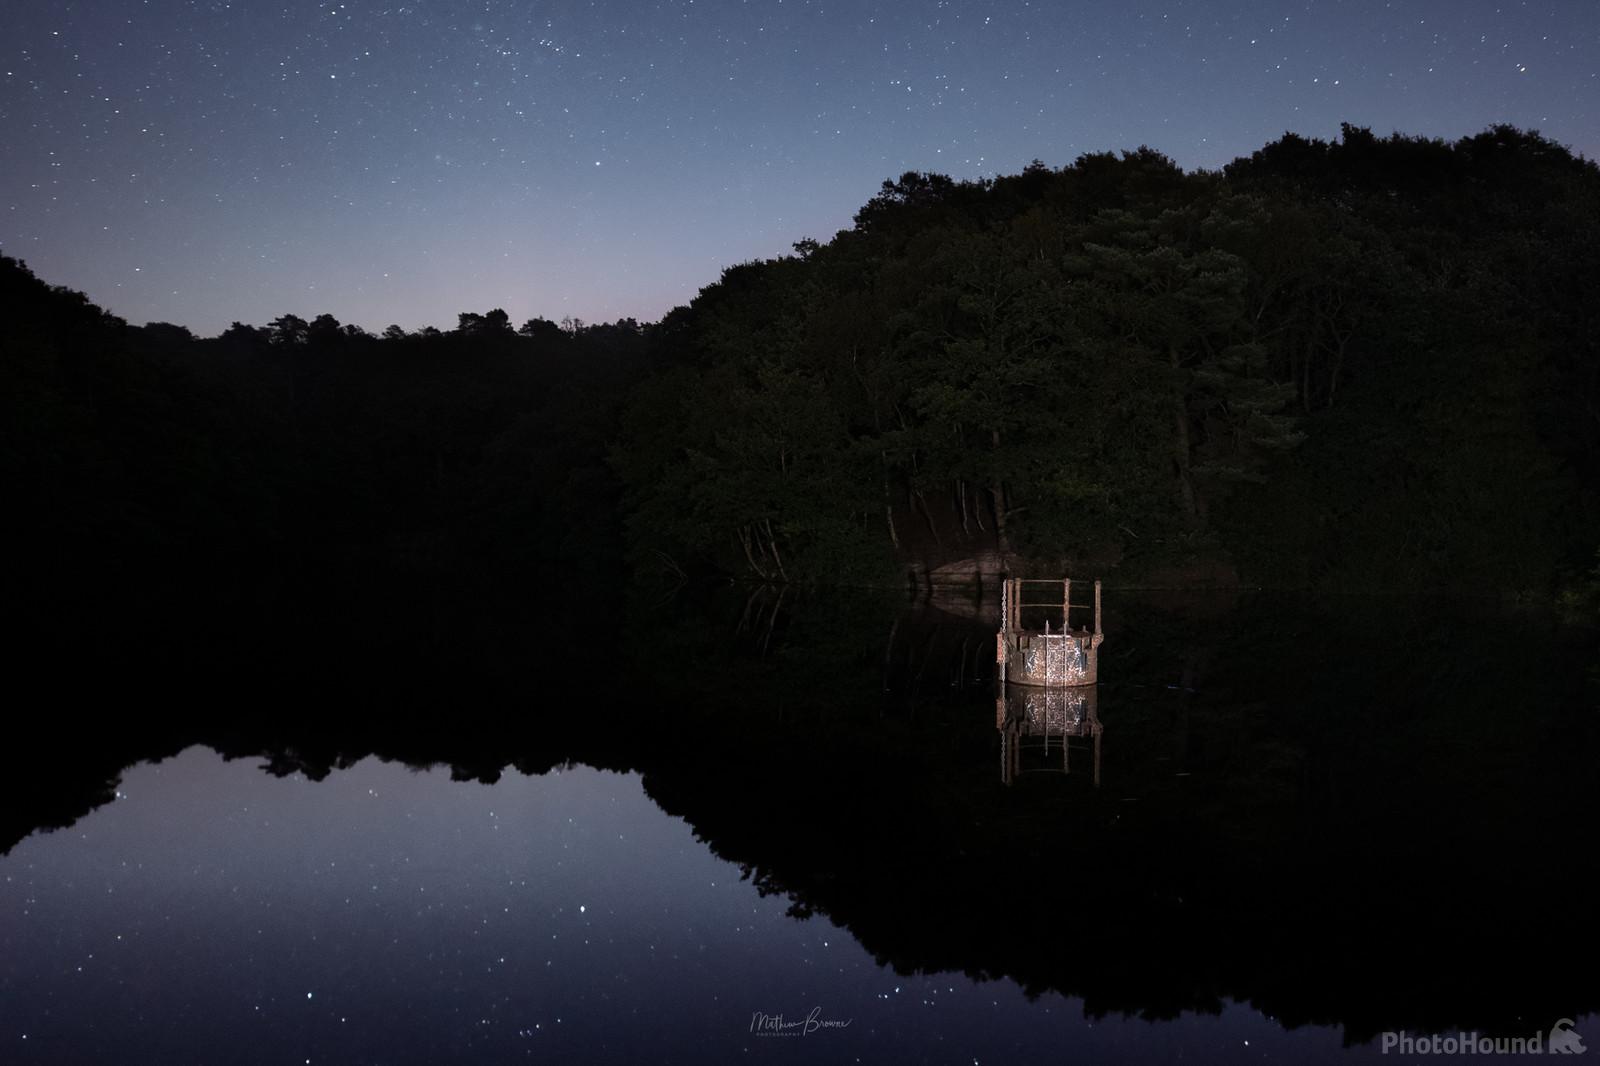 Image of Mosshouse Wood Reservoir by Mathew Browne